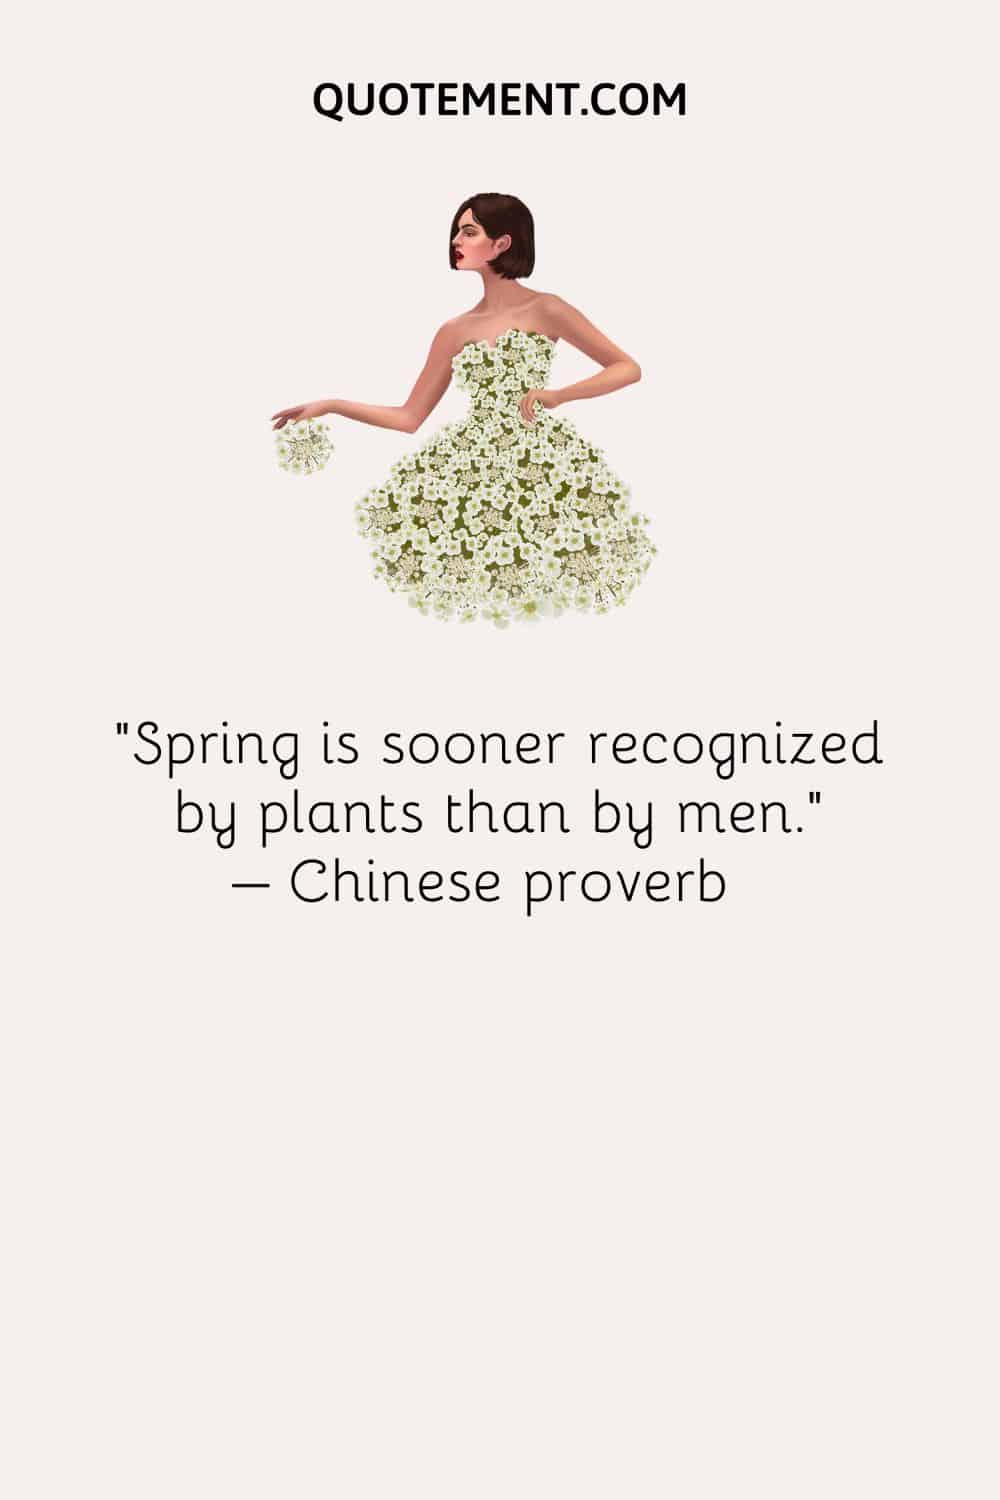 Spring is sooner recognized by plants than by men. – Chinese proverb